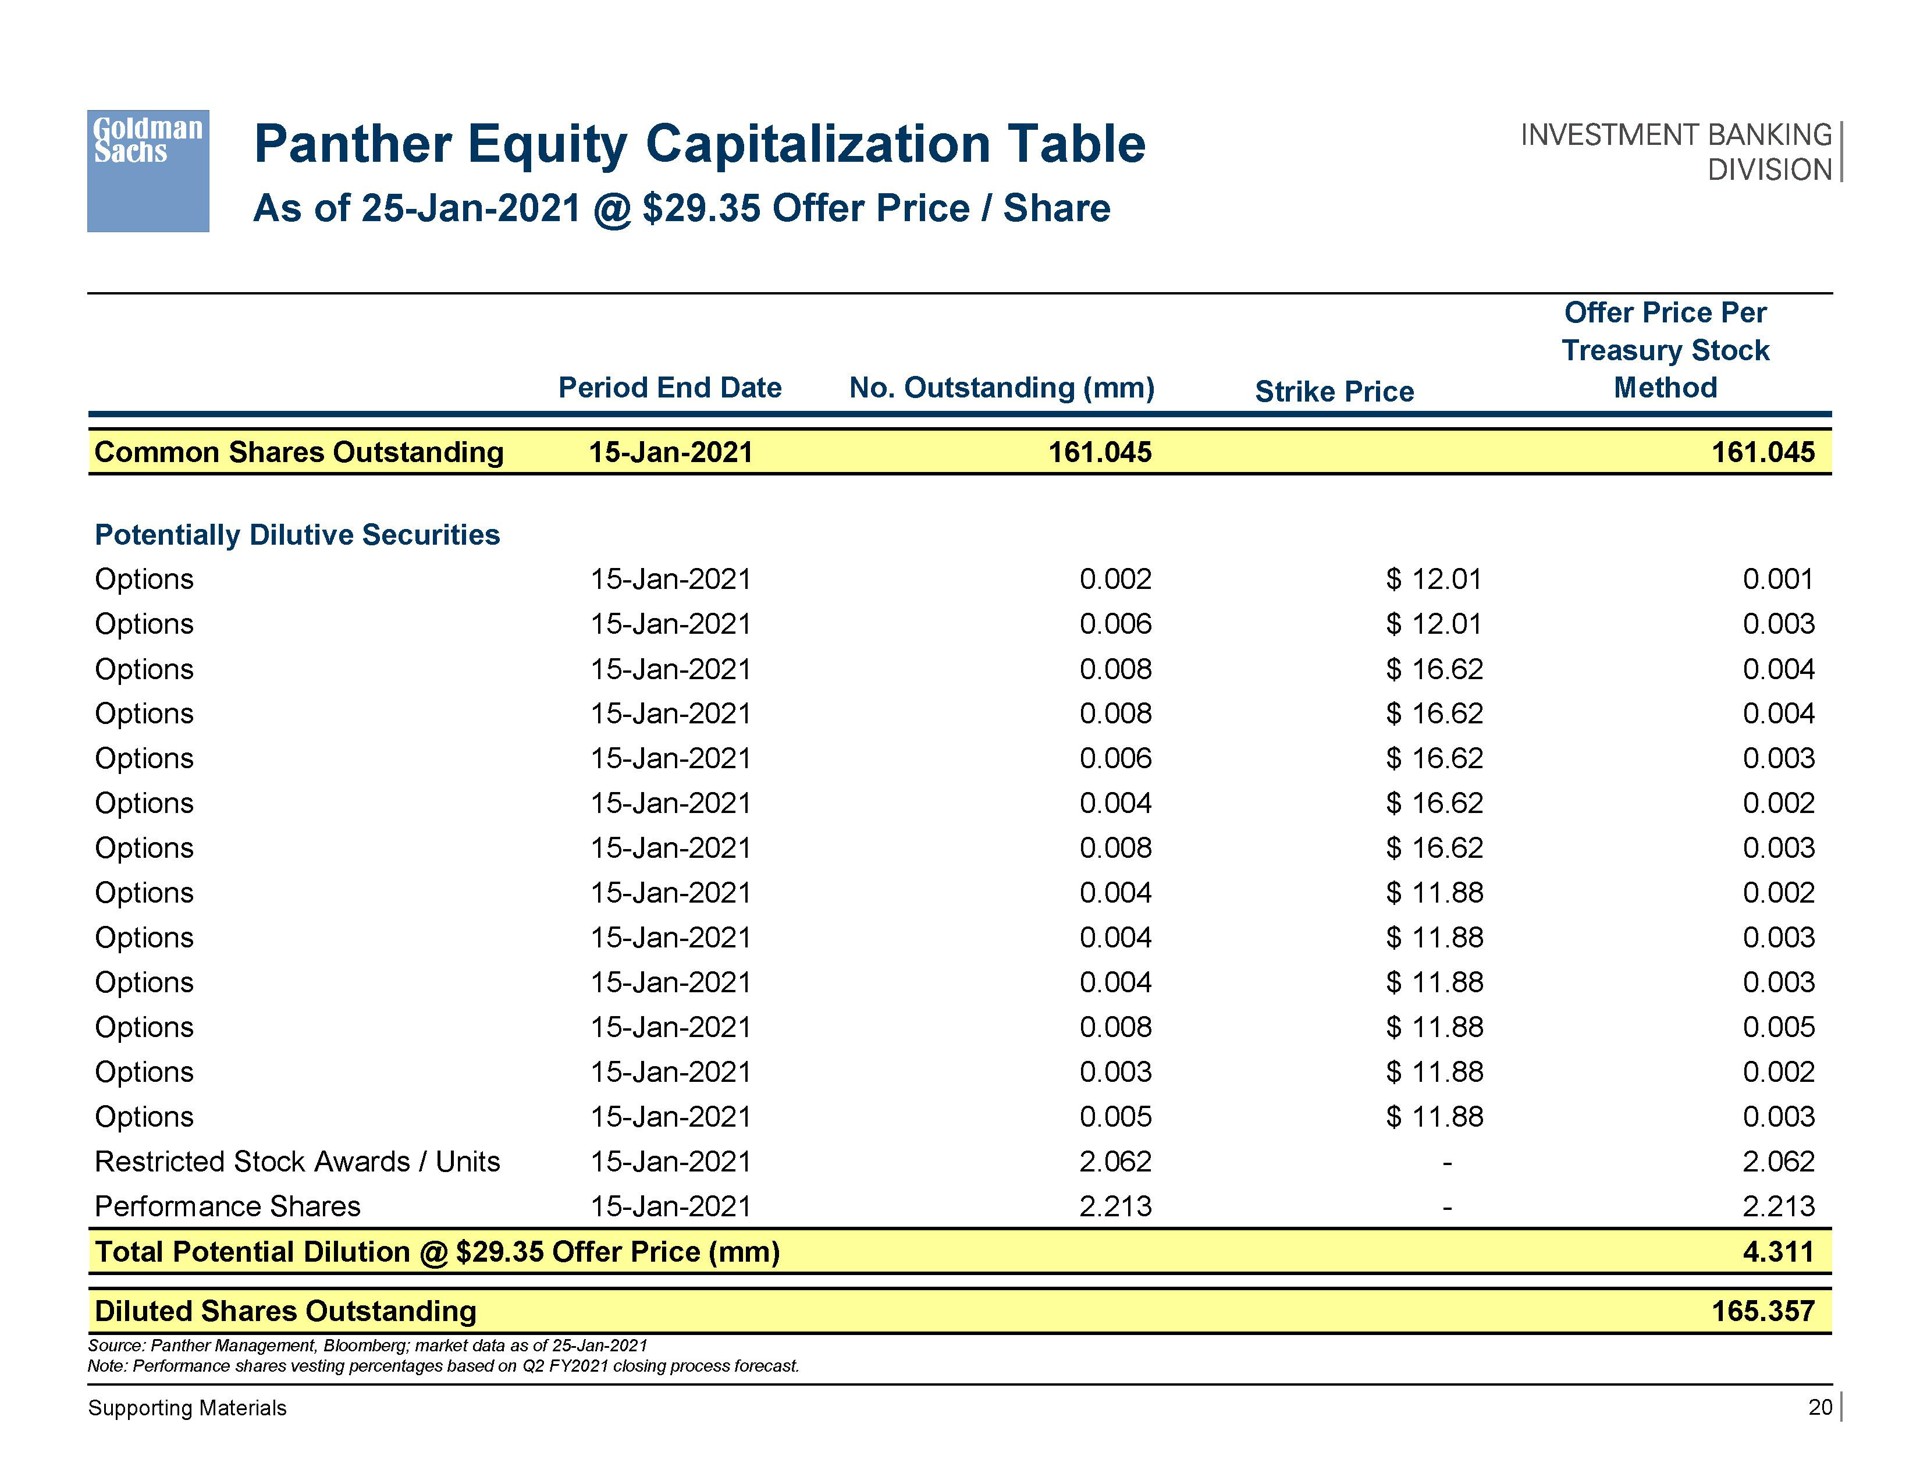 panther equity capitalization table | Goldman Sachs